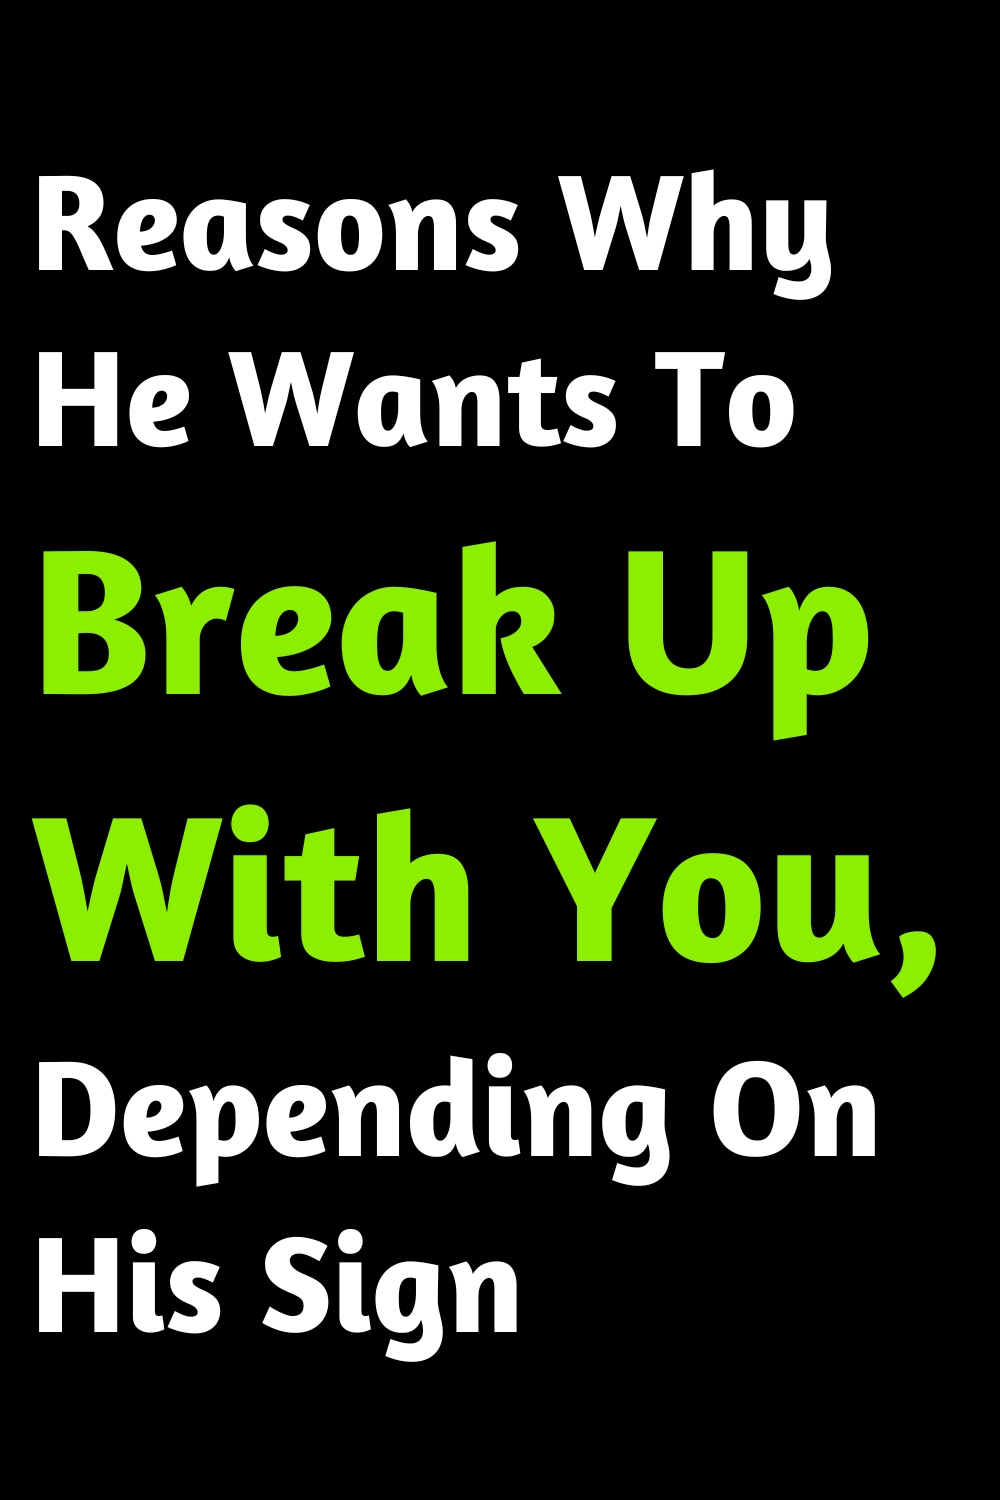 Reasons Why He Wants To Break Up With You, Depending On His Sign